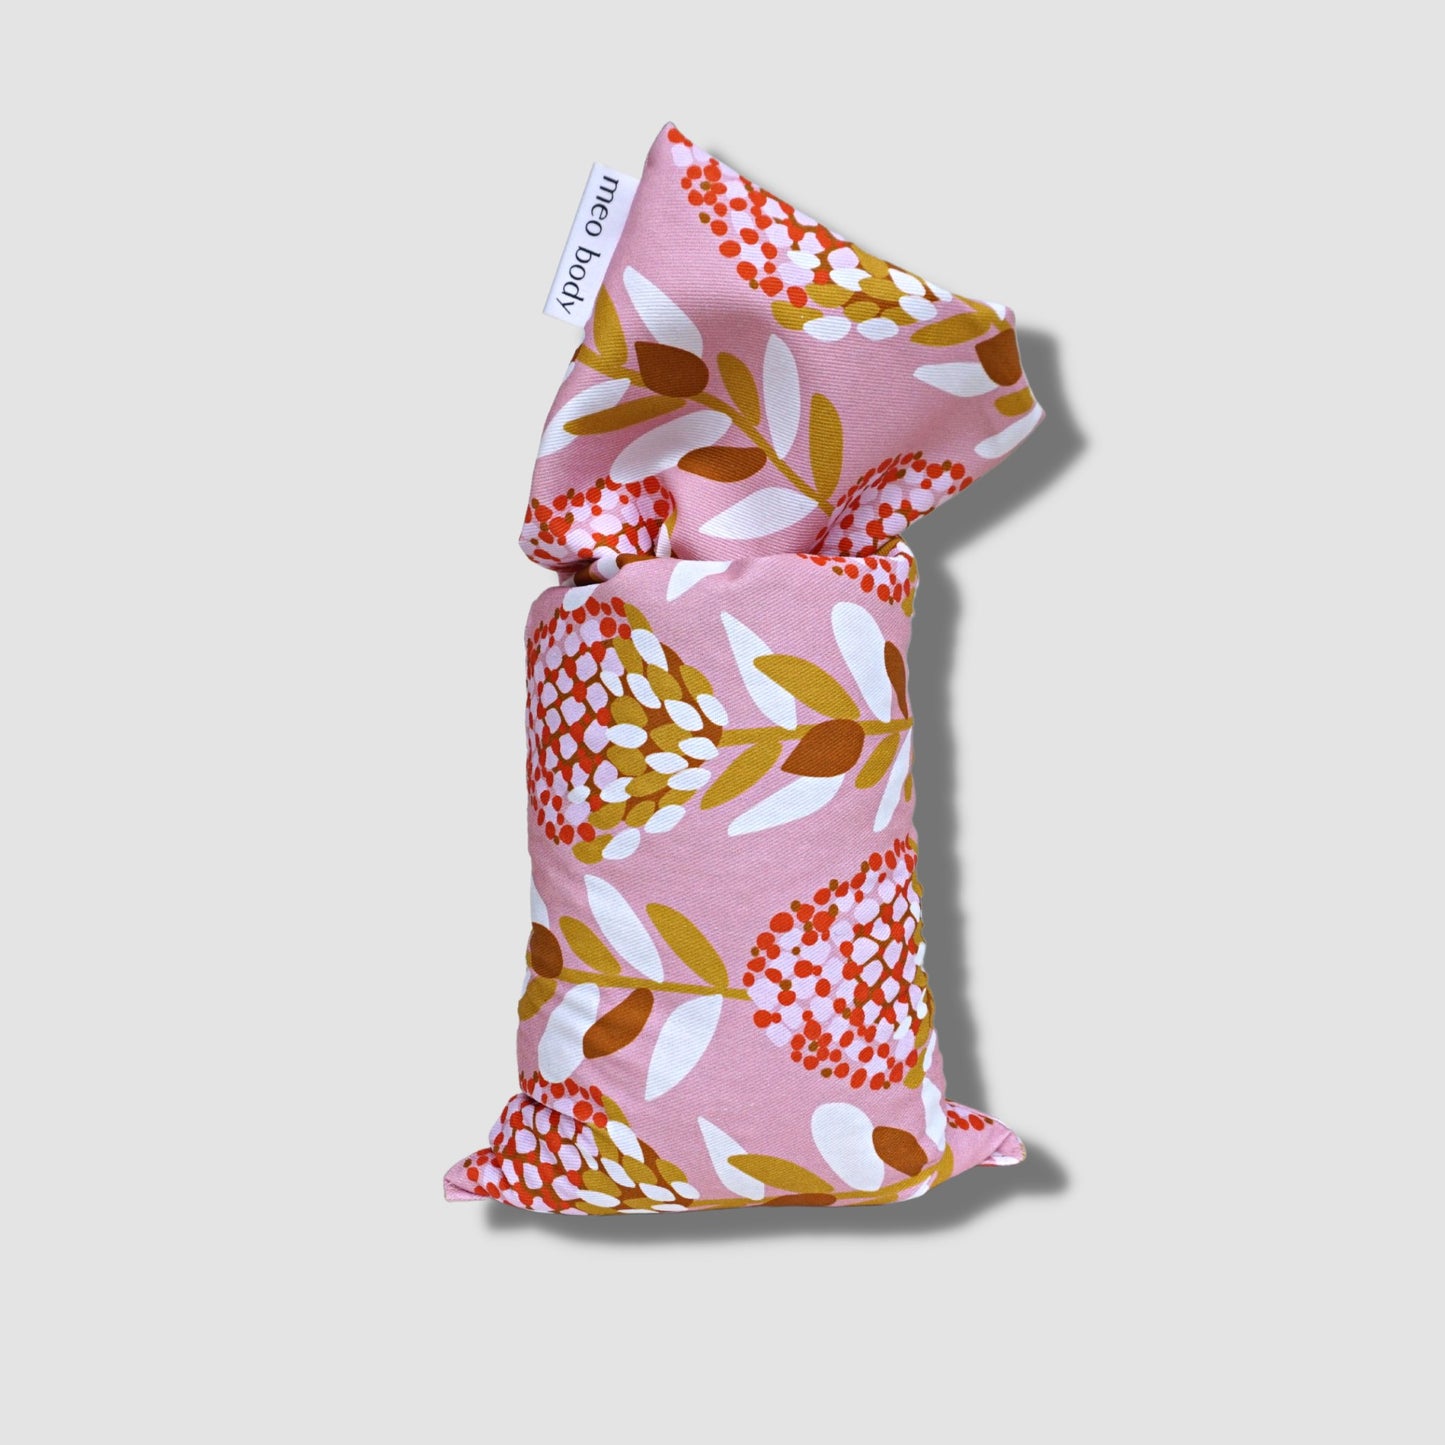 Hand-crafted Wheat Heat Pack, 'Pink Protea' design - Meo Body